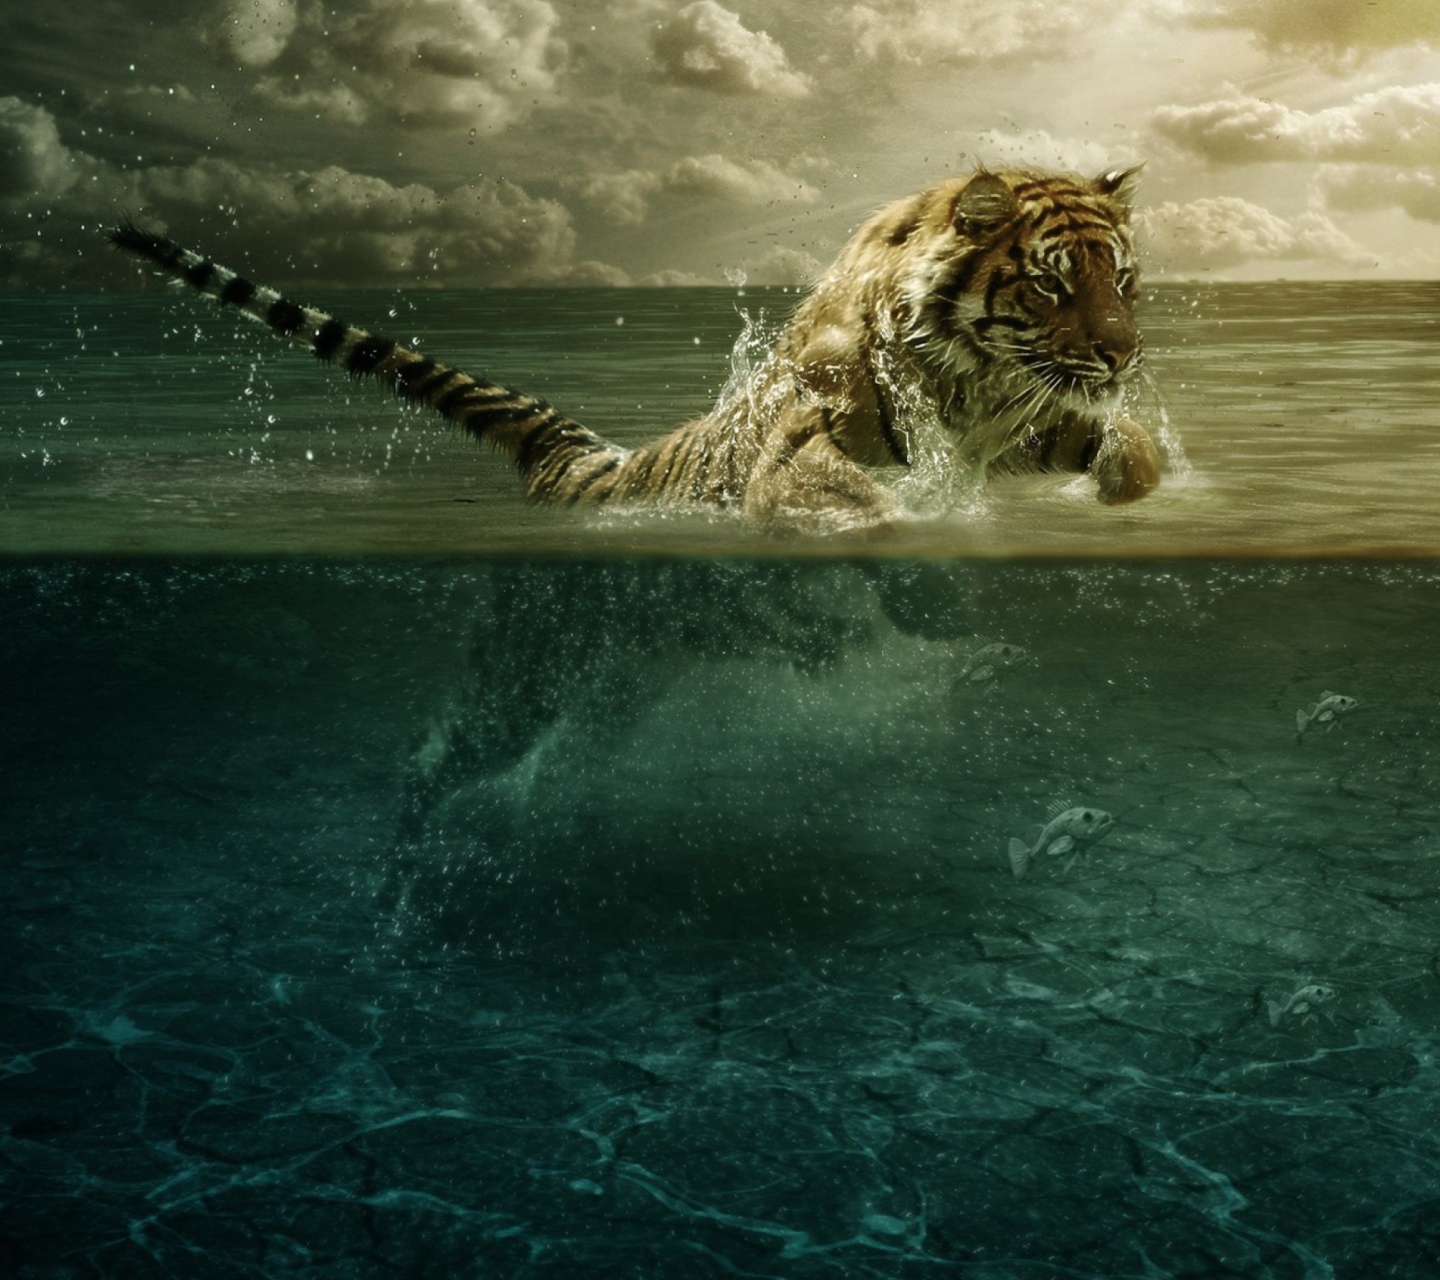 Tiger Jumping In Water wallpaper 1440x1280